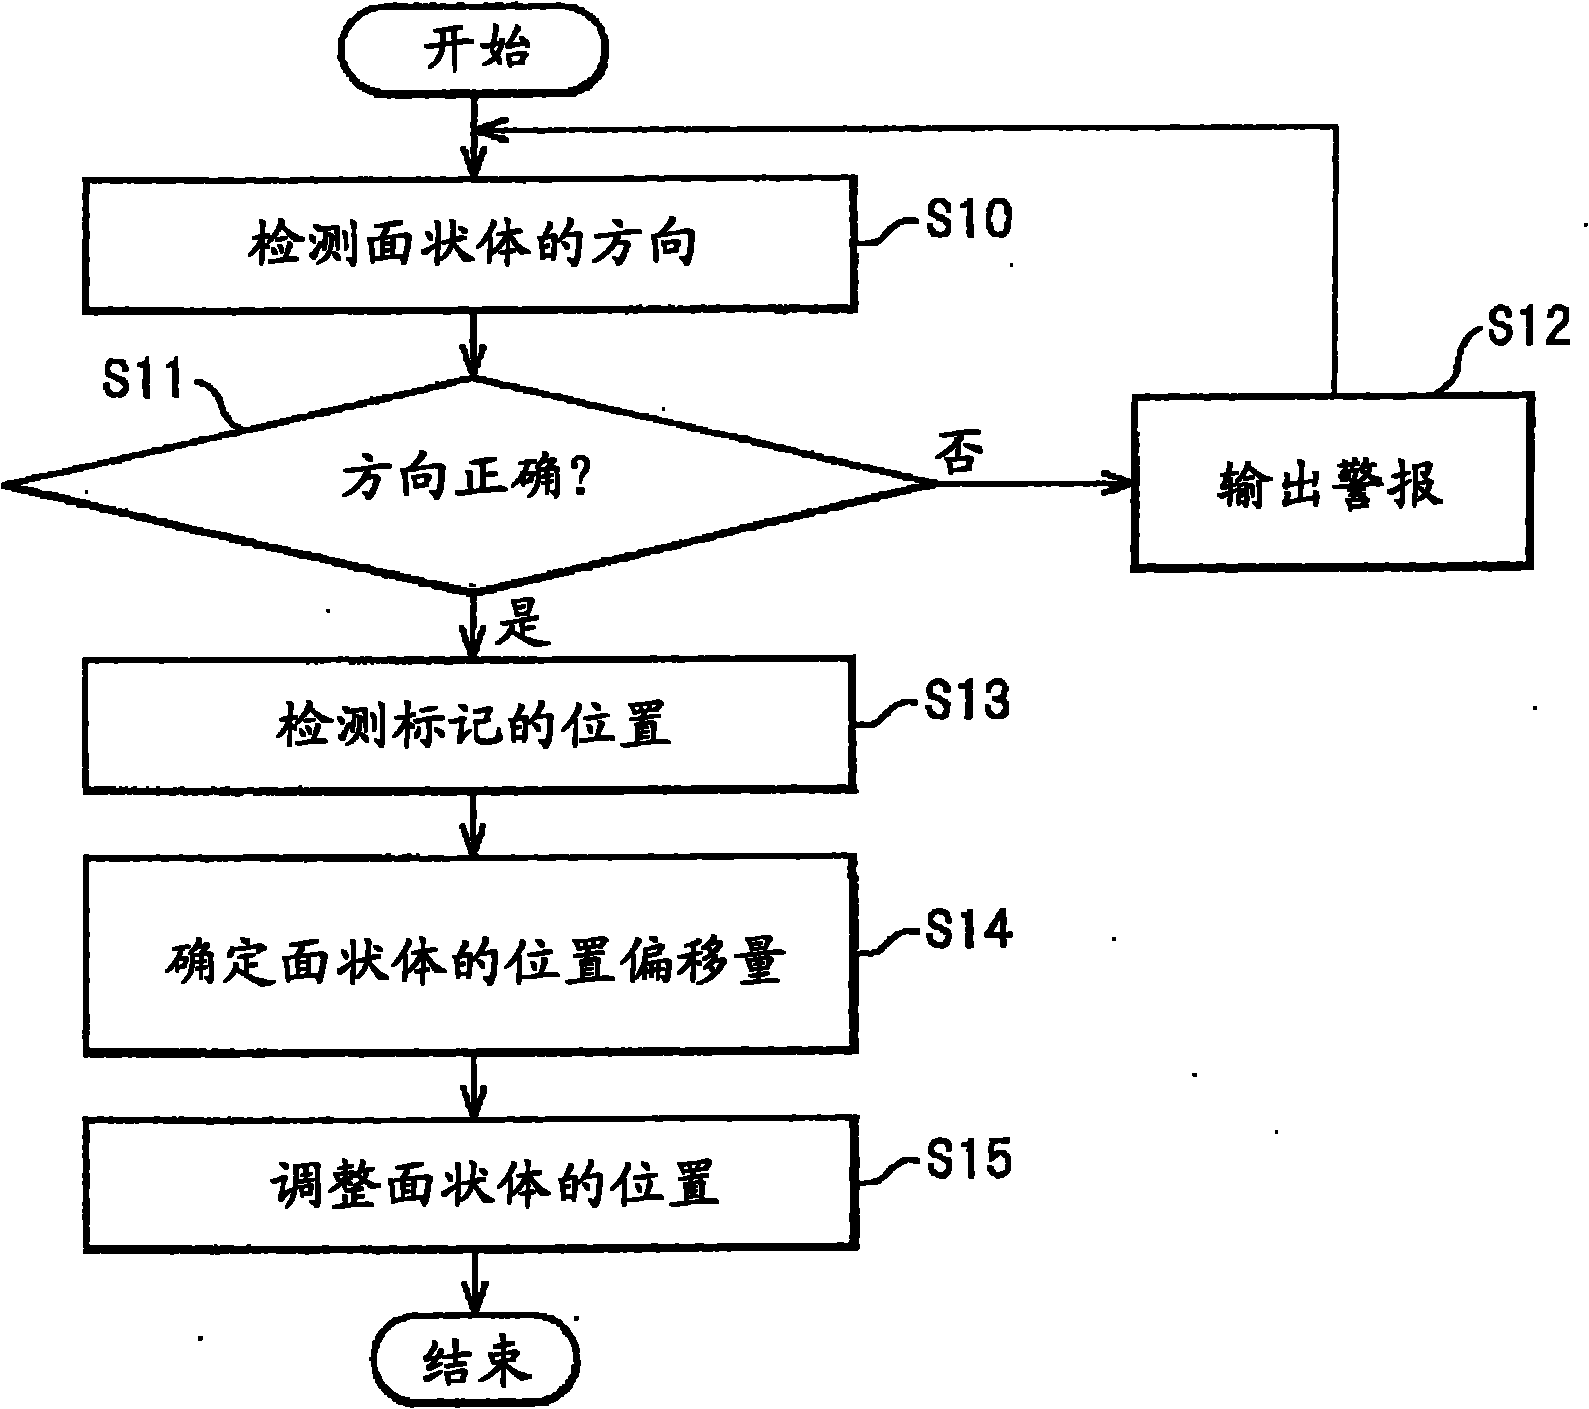 Alignment device for planar element, manufacturing equipment for the same, alignment method for the same, and manufacturing method for the same